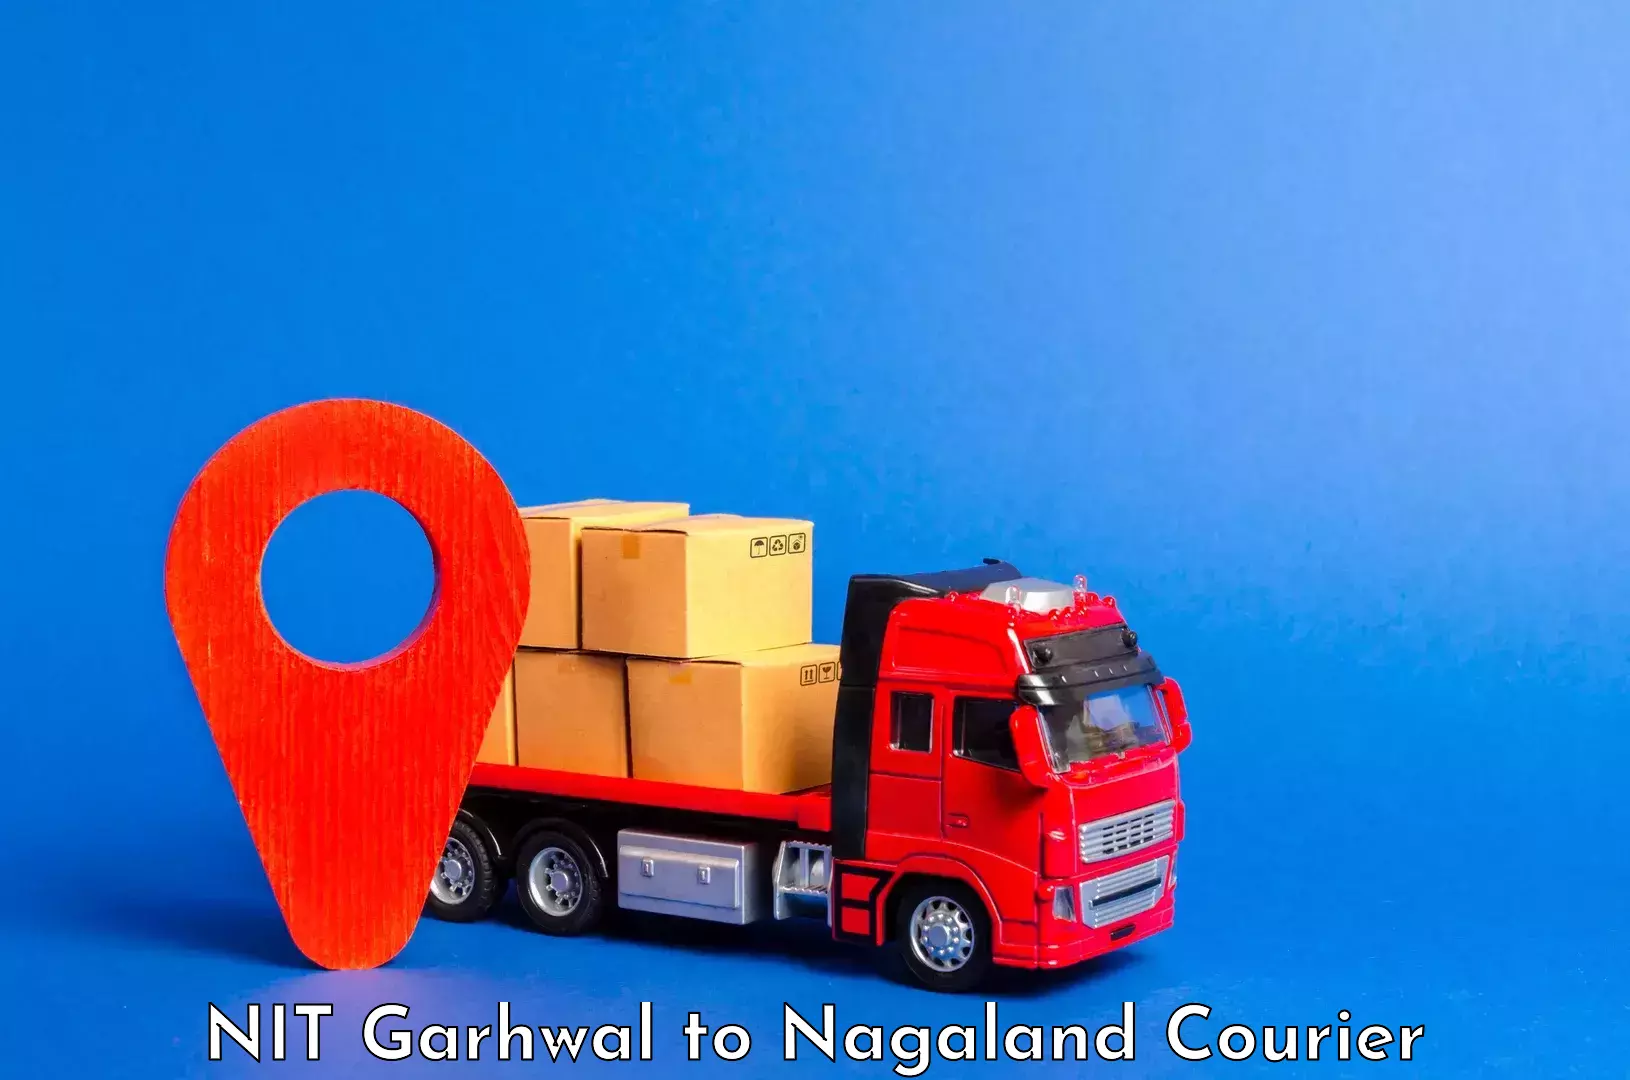 Luggage shipment specialists NIT Garhwal to Nagaland